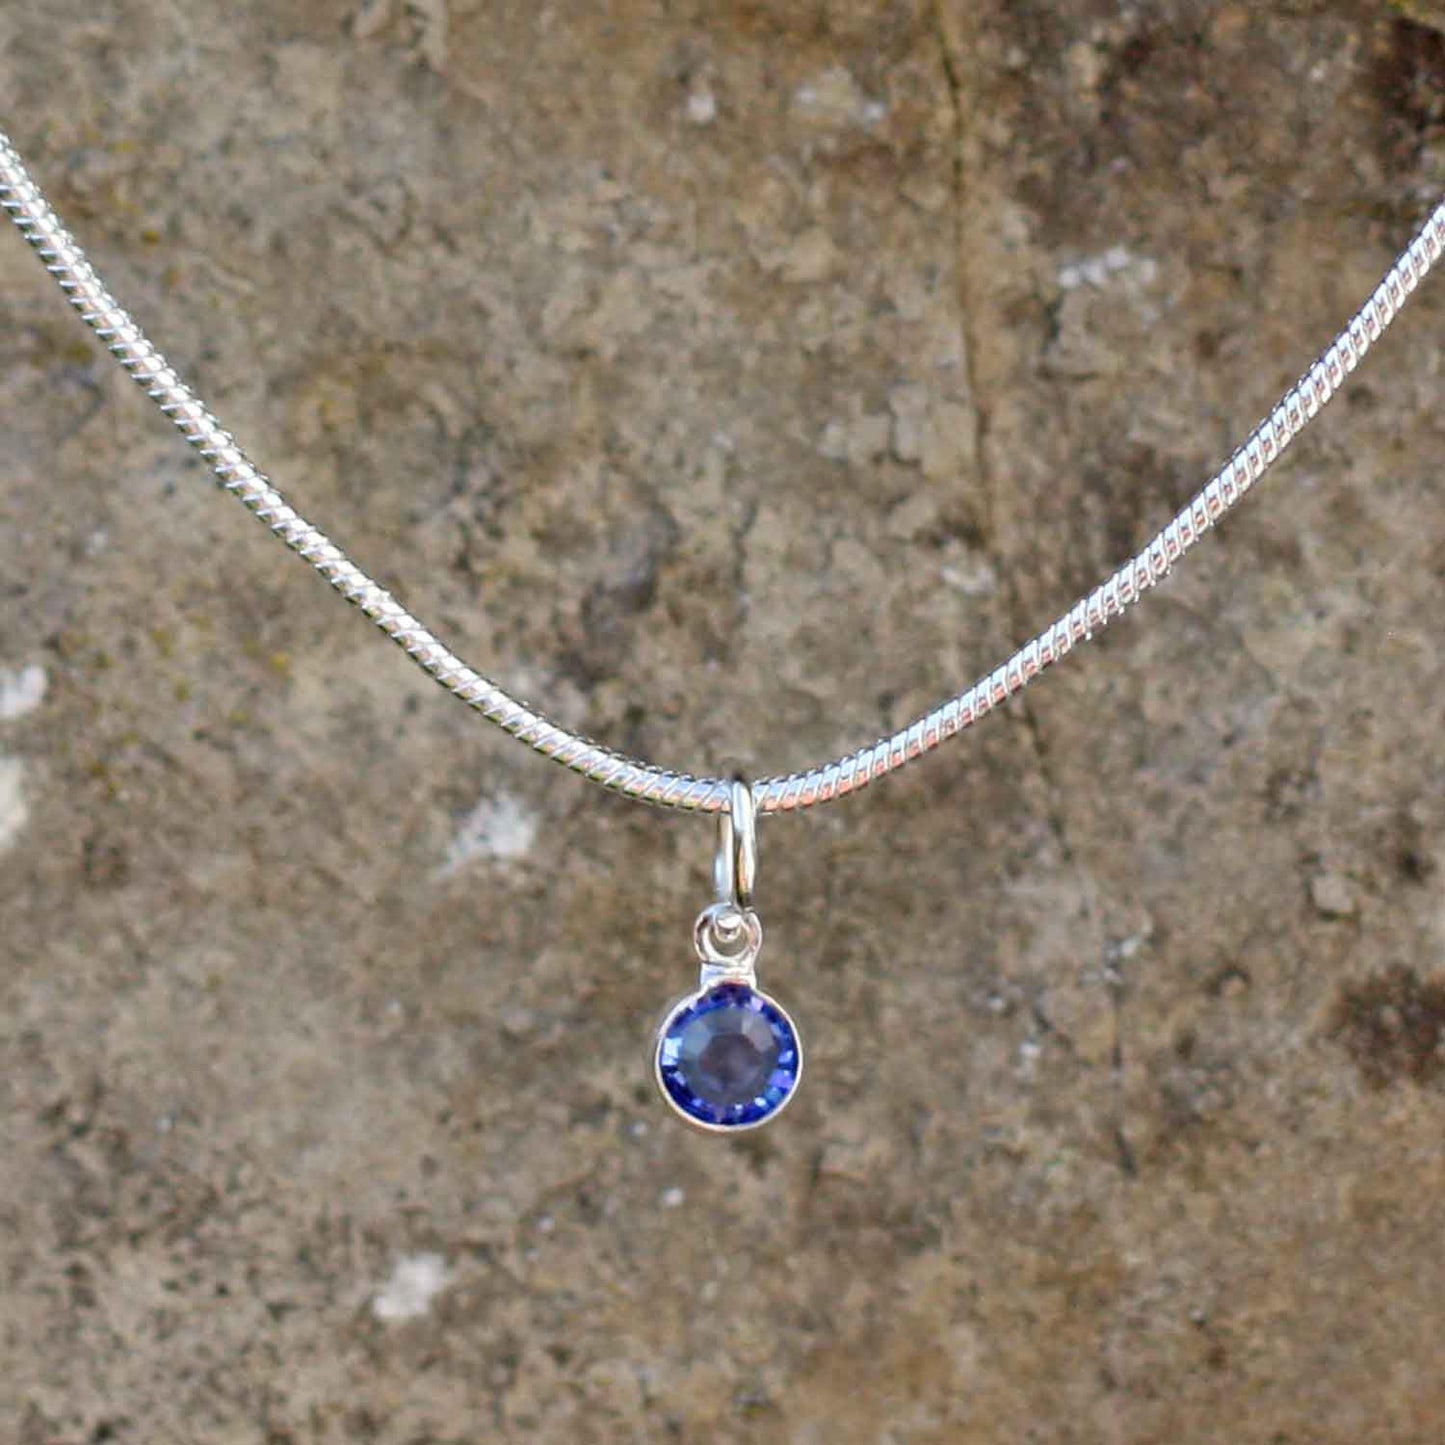 Birthstone Crystal Pendant - Silver Necklace - Welsh Language - September / Sapphire